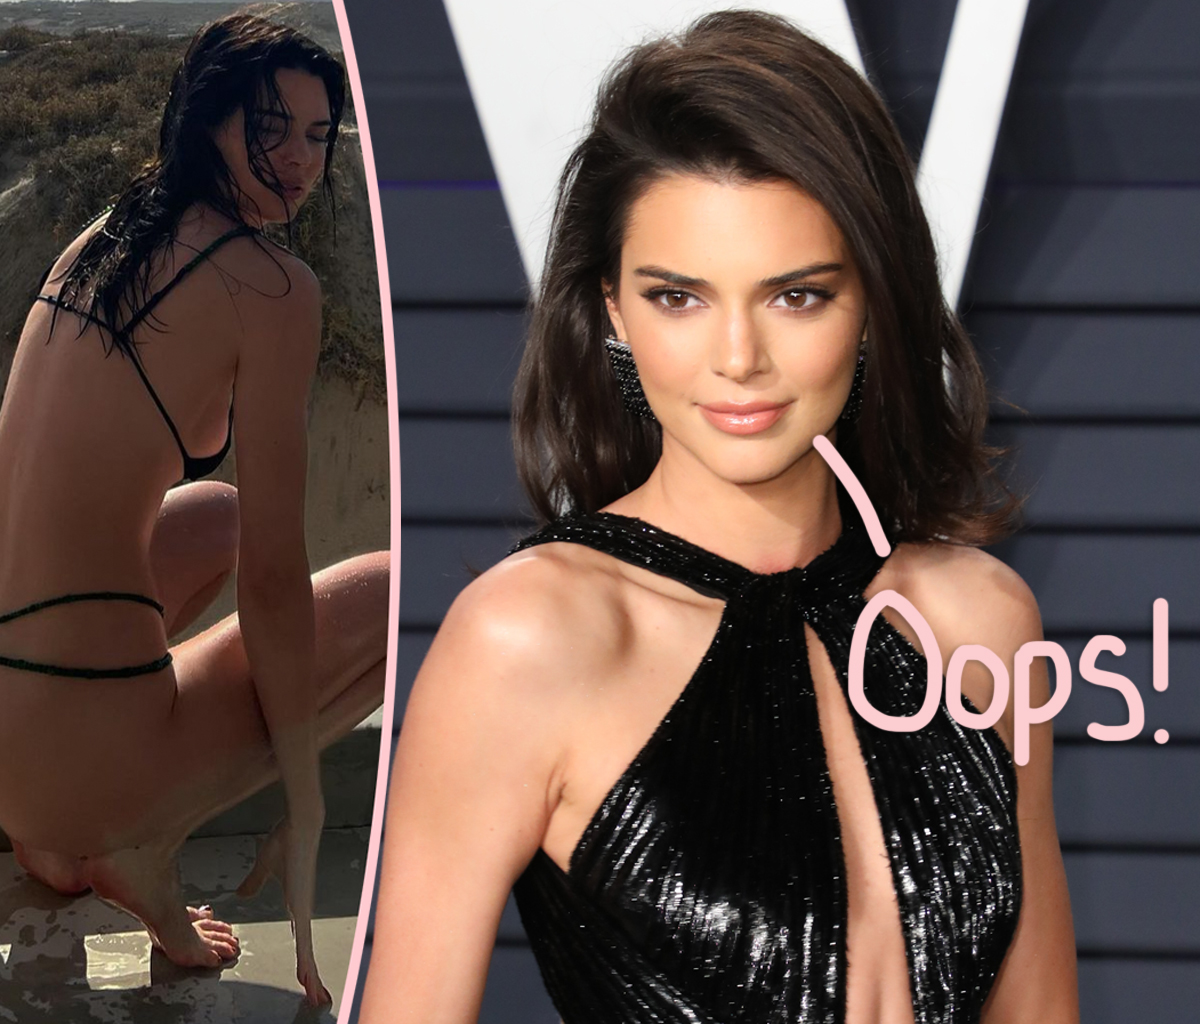 #Fans Accuse Kendall Jenner Of Major Photoshop Fail In New Bikini Pictures!